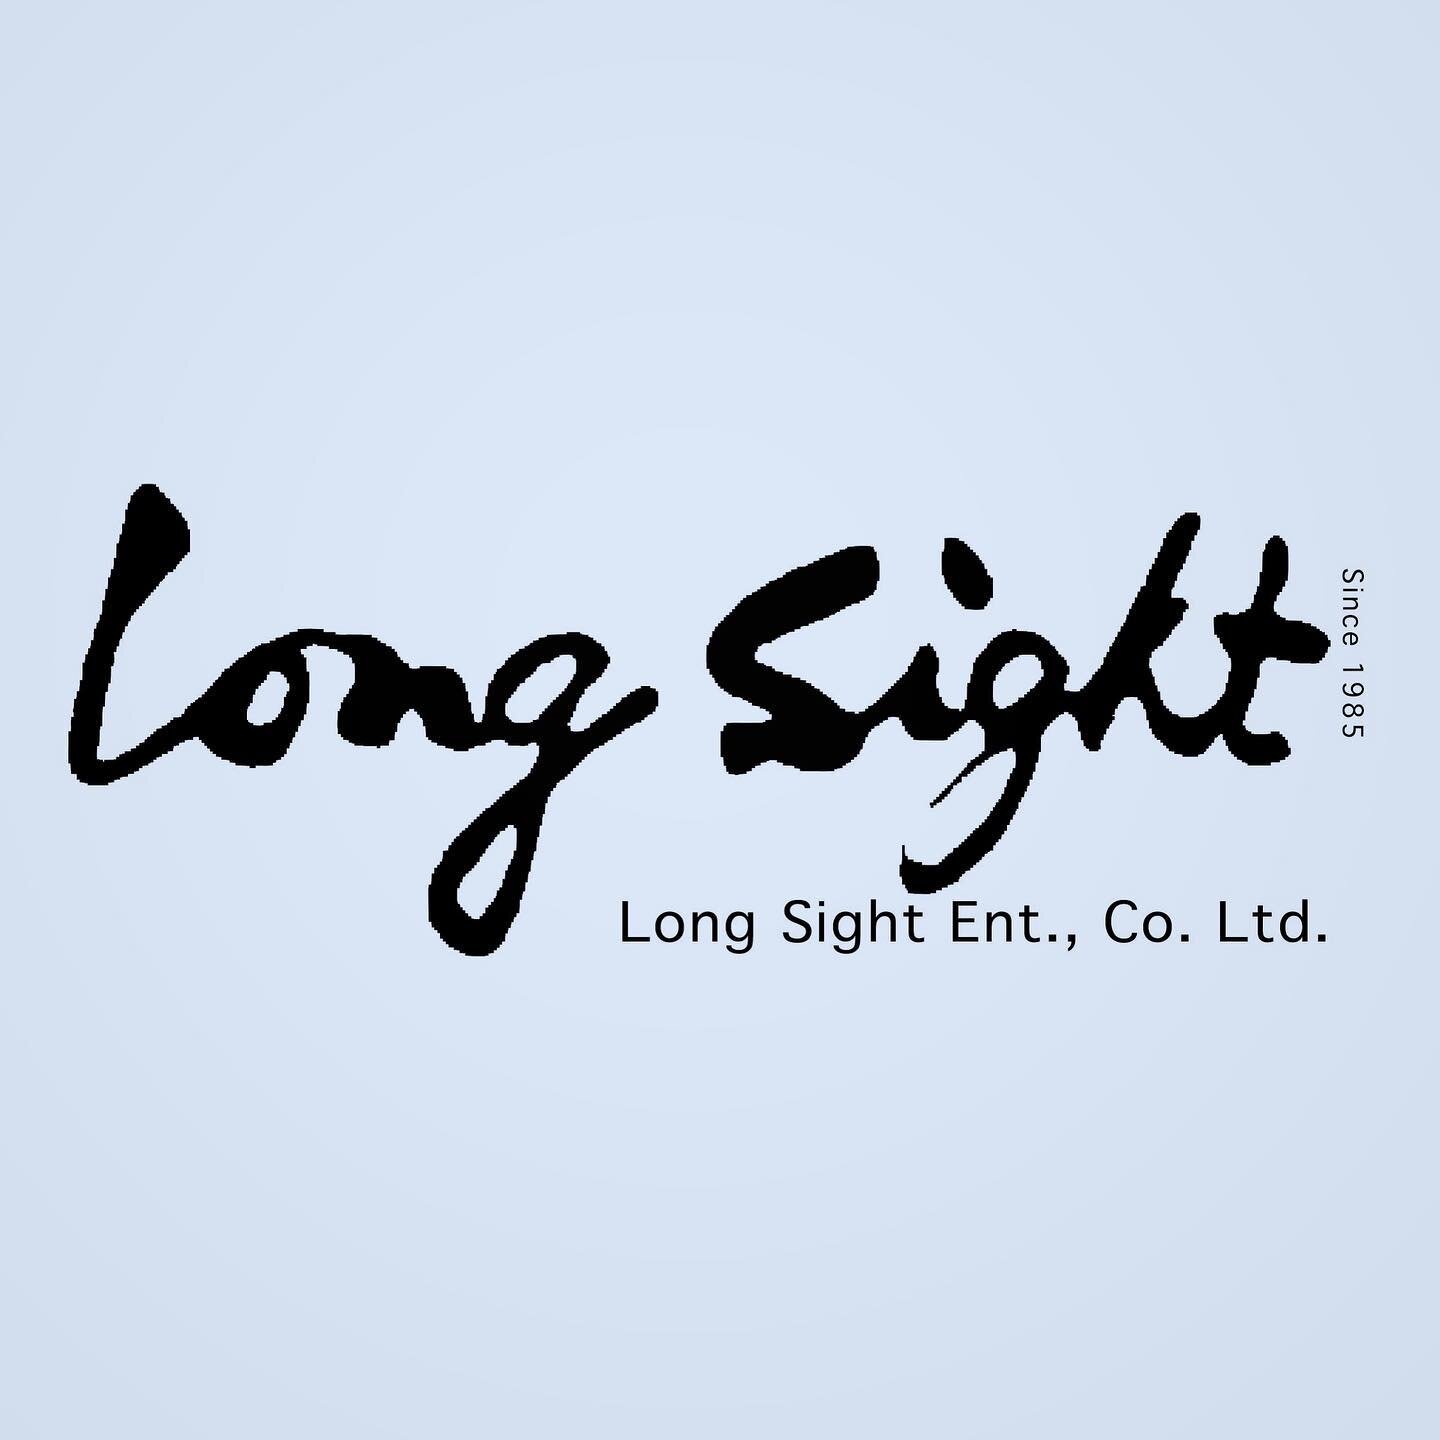 Long Sight Ent. Co., Ltd. 
//
was established in Taiwan since #1985. We are identified as a handbag manufacturer specializing in OEM and ODM. 

We are recognized for the exceptional quality in all of our products in verities of materials especially i